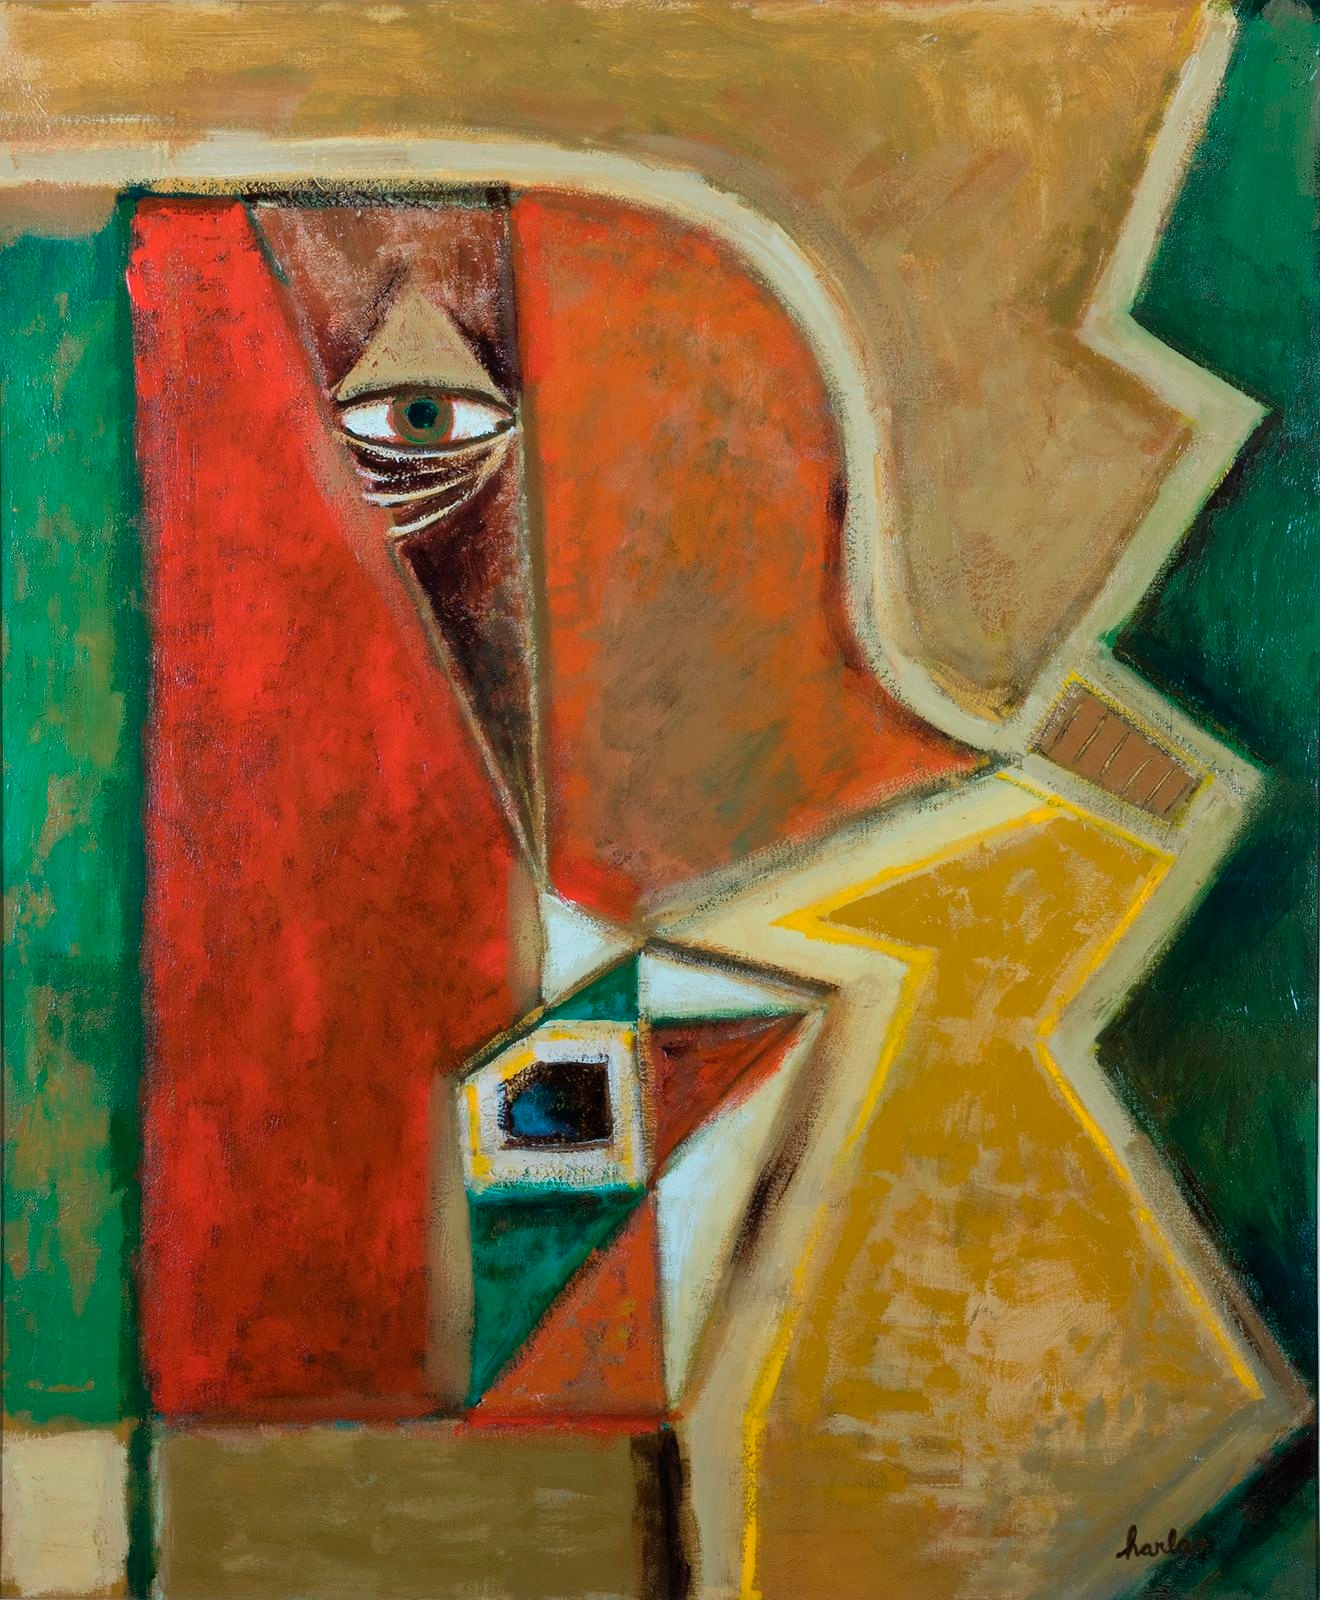 UNTITLED (MASK) by Harlan Jackson, 1950